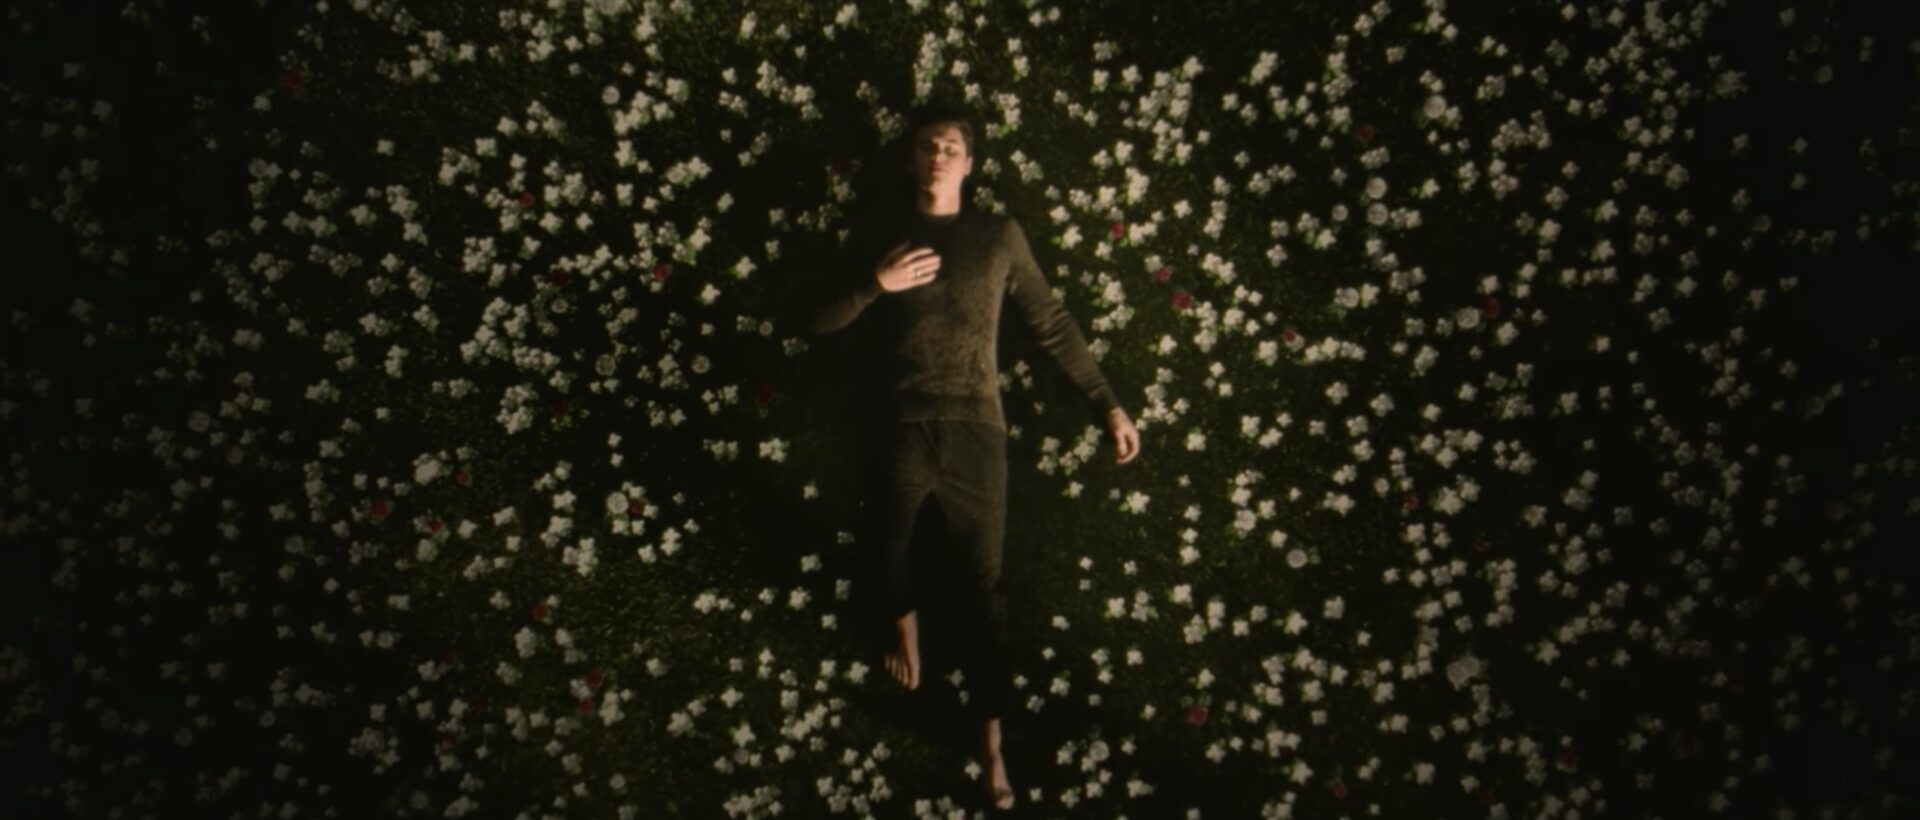 Shawn Mendes shares simply beautiful video for “In My Blood”